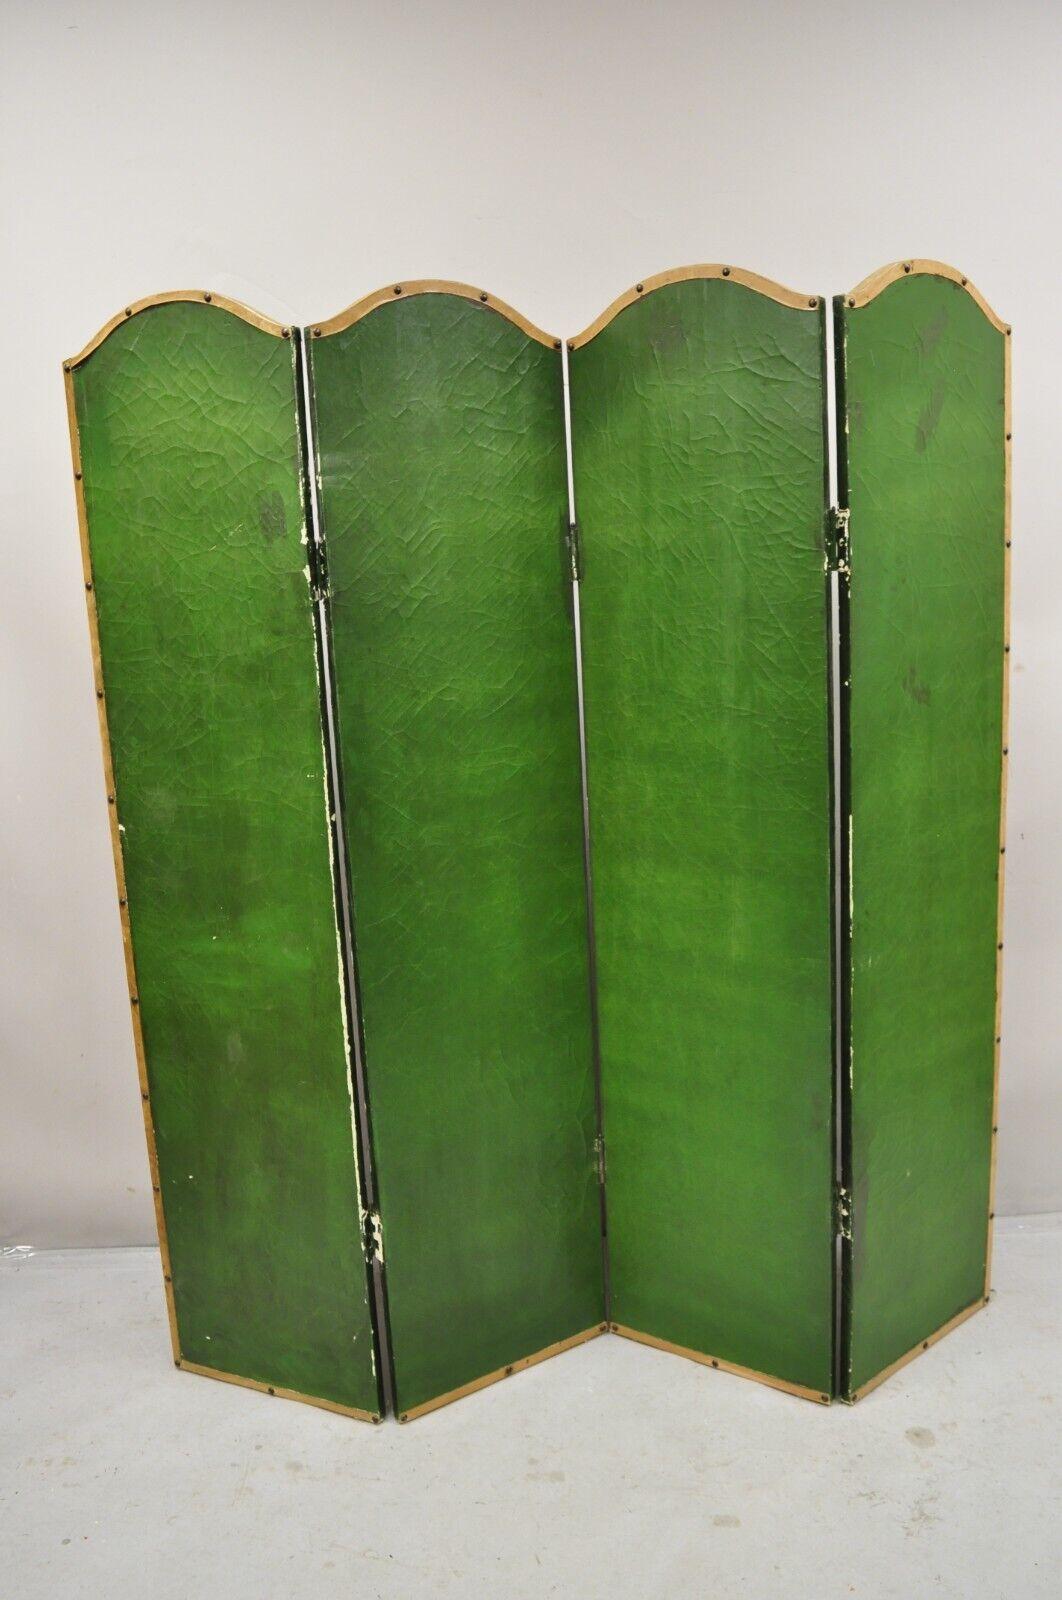 Venetian Hand Painted Oil on Canvas 4 Section Peacock Bird Screen Room Divider 3